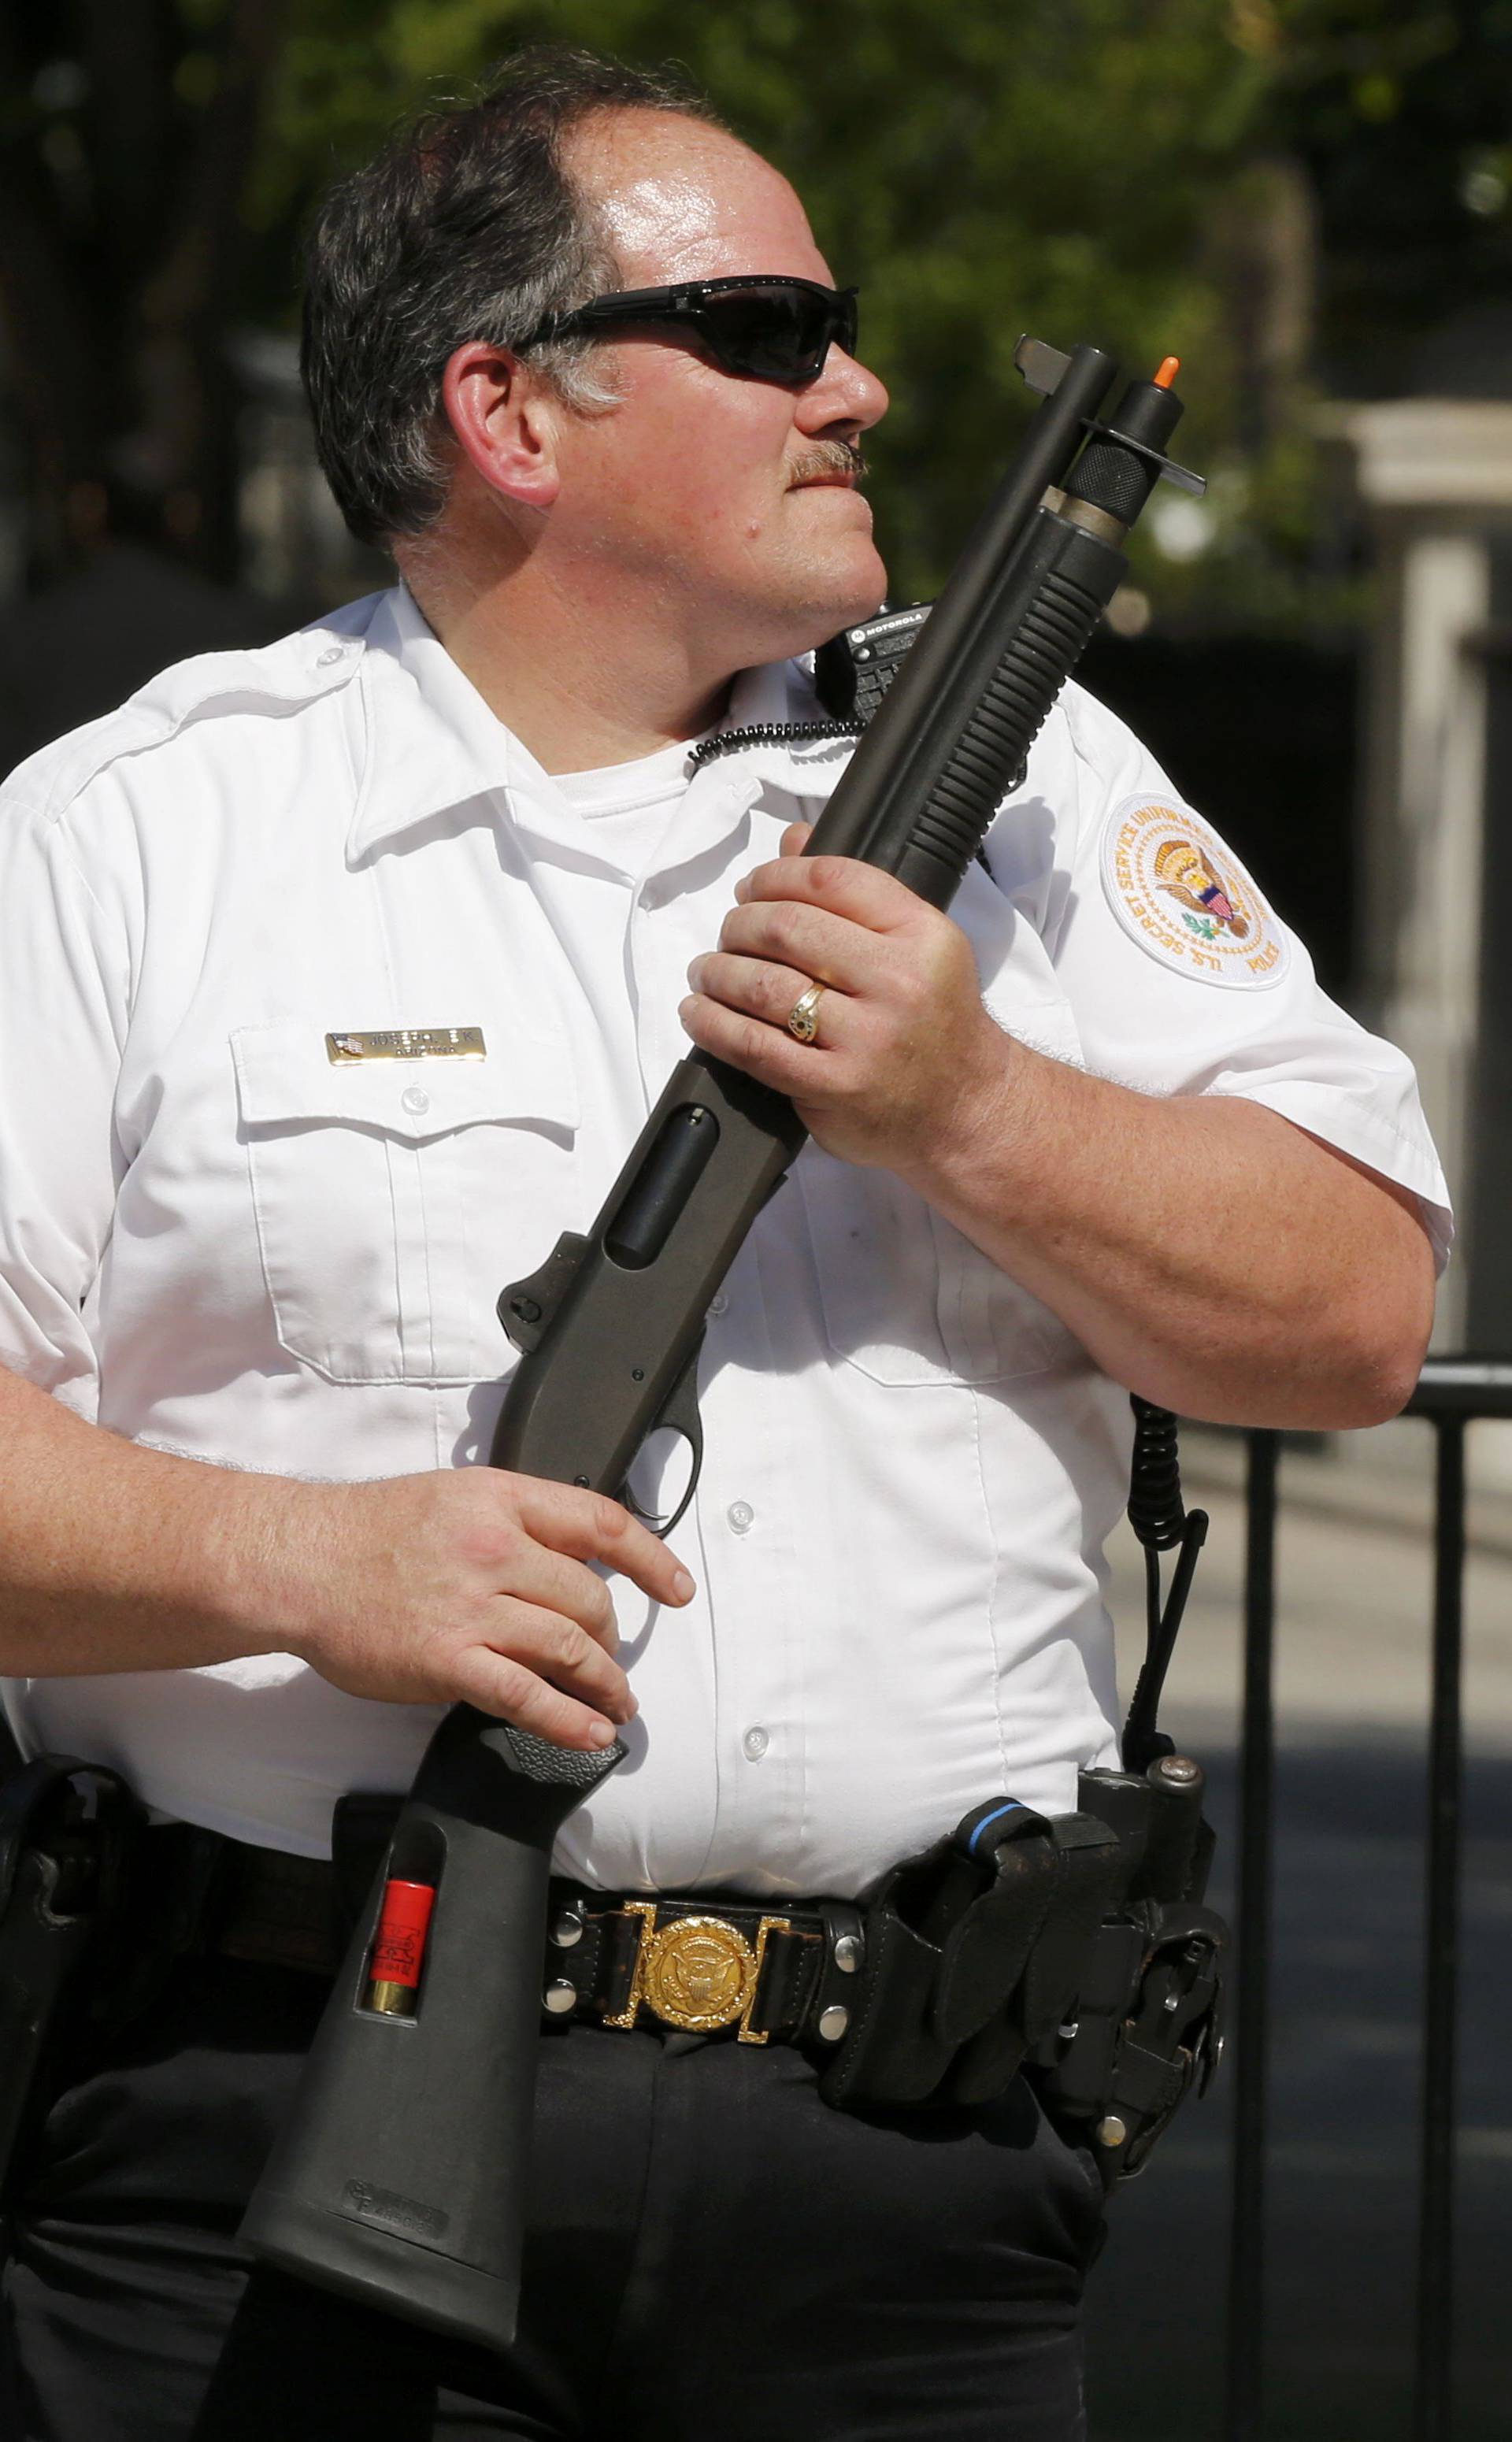 A uniformed Secret Service agent holds a shotgun after a shooting incident near the White House in Washington DC